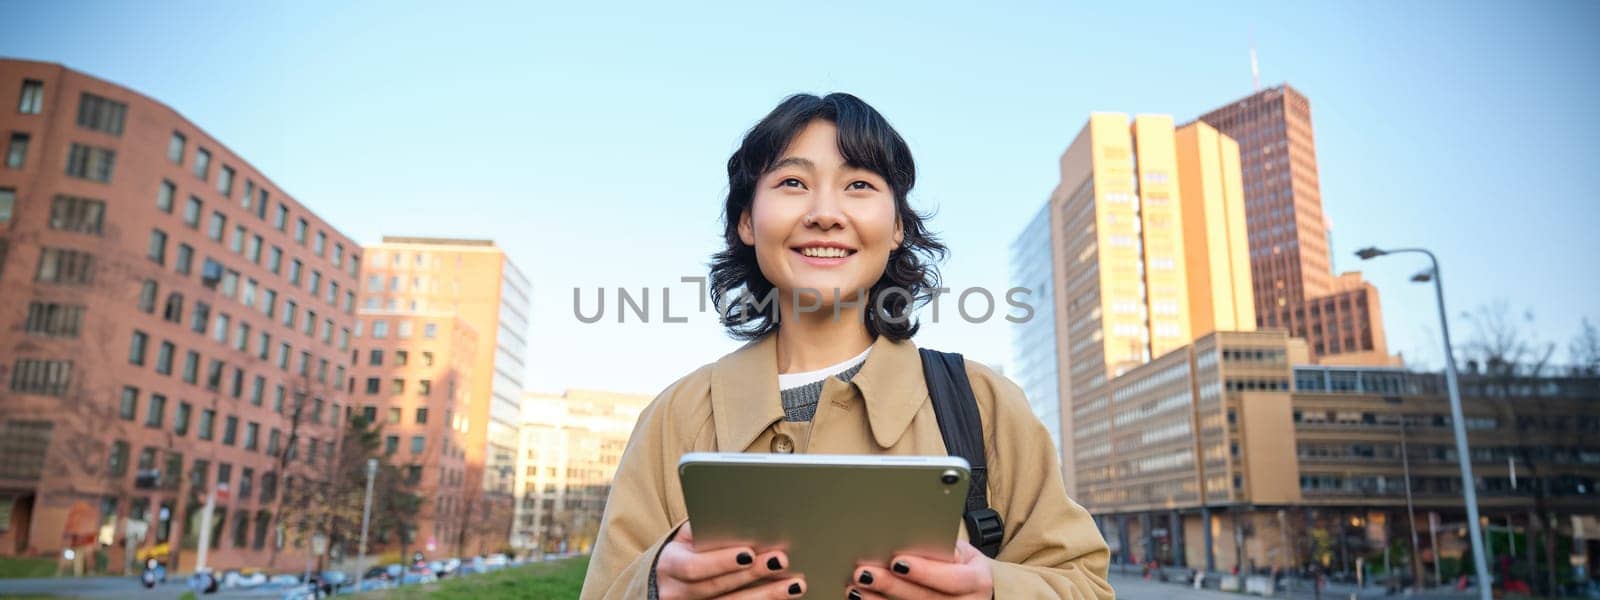 Happy asian girl stands on street, university student walks with digital tablet in hands and smiles, stands in city centre.